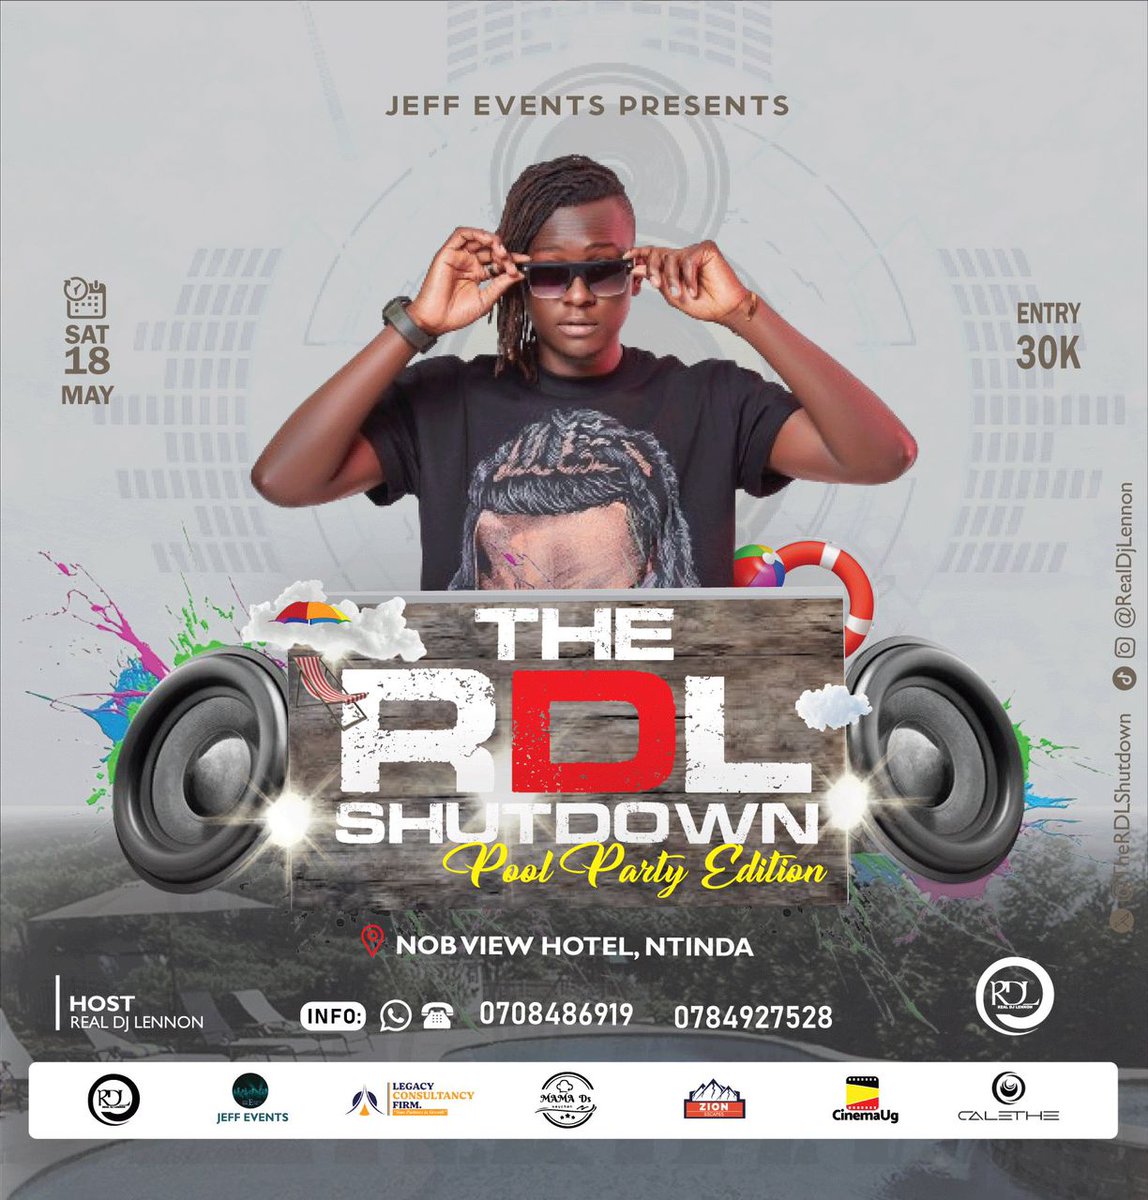 Don't missout on Vibes ku vibes,enjoyments ku enjoyments reloading 💃💃 #TheRDLShutdown happening on 18th May at Nob View Hotel. Tickets are 30K come one come all by force by energy 🤣